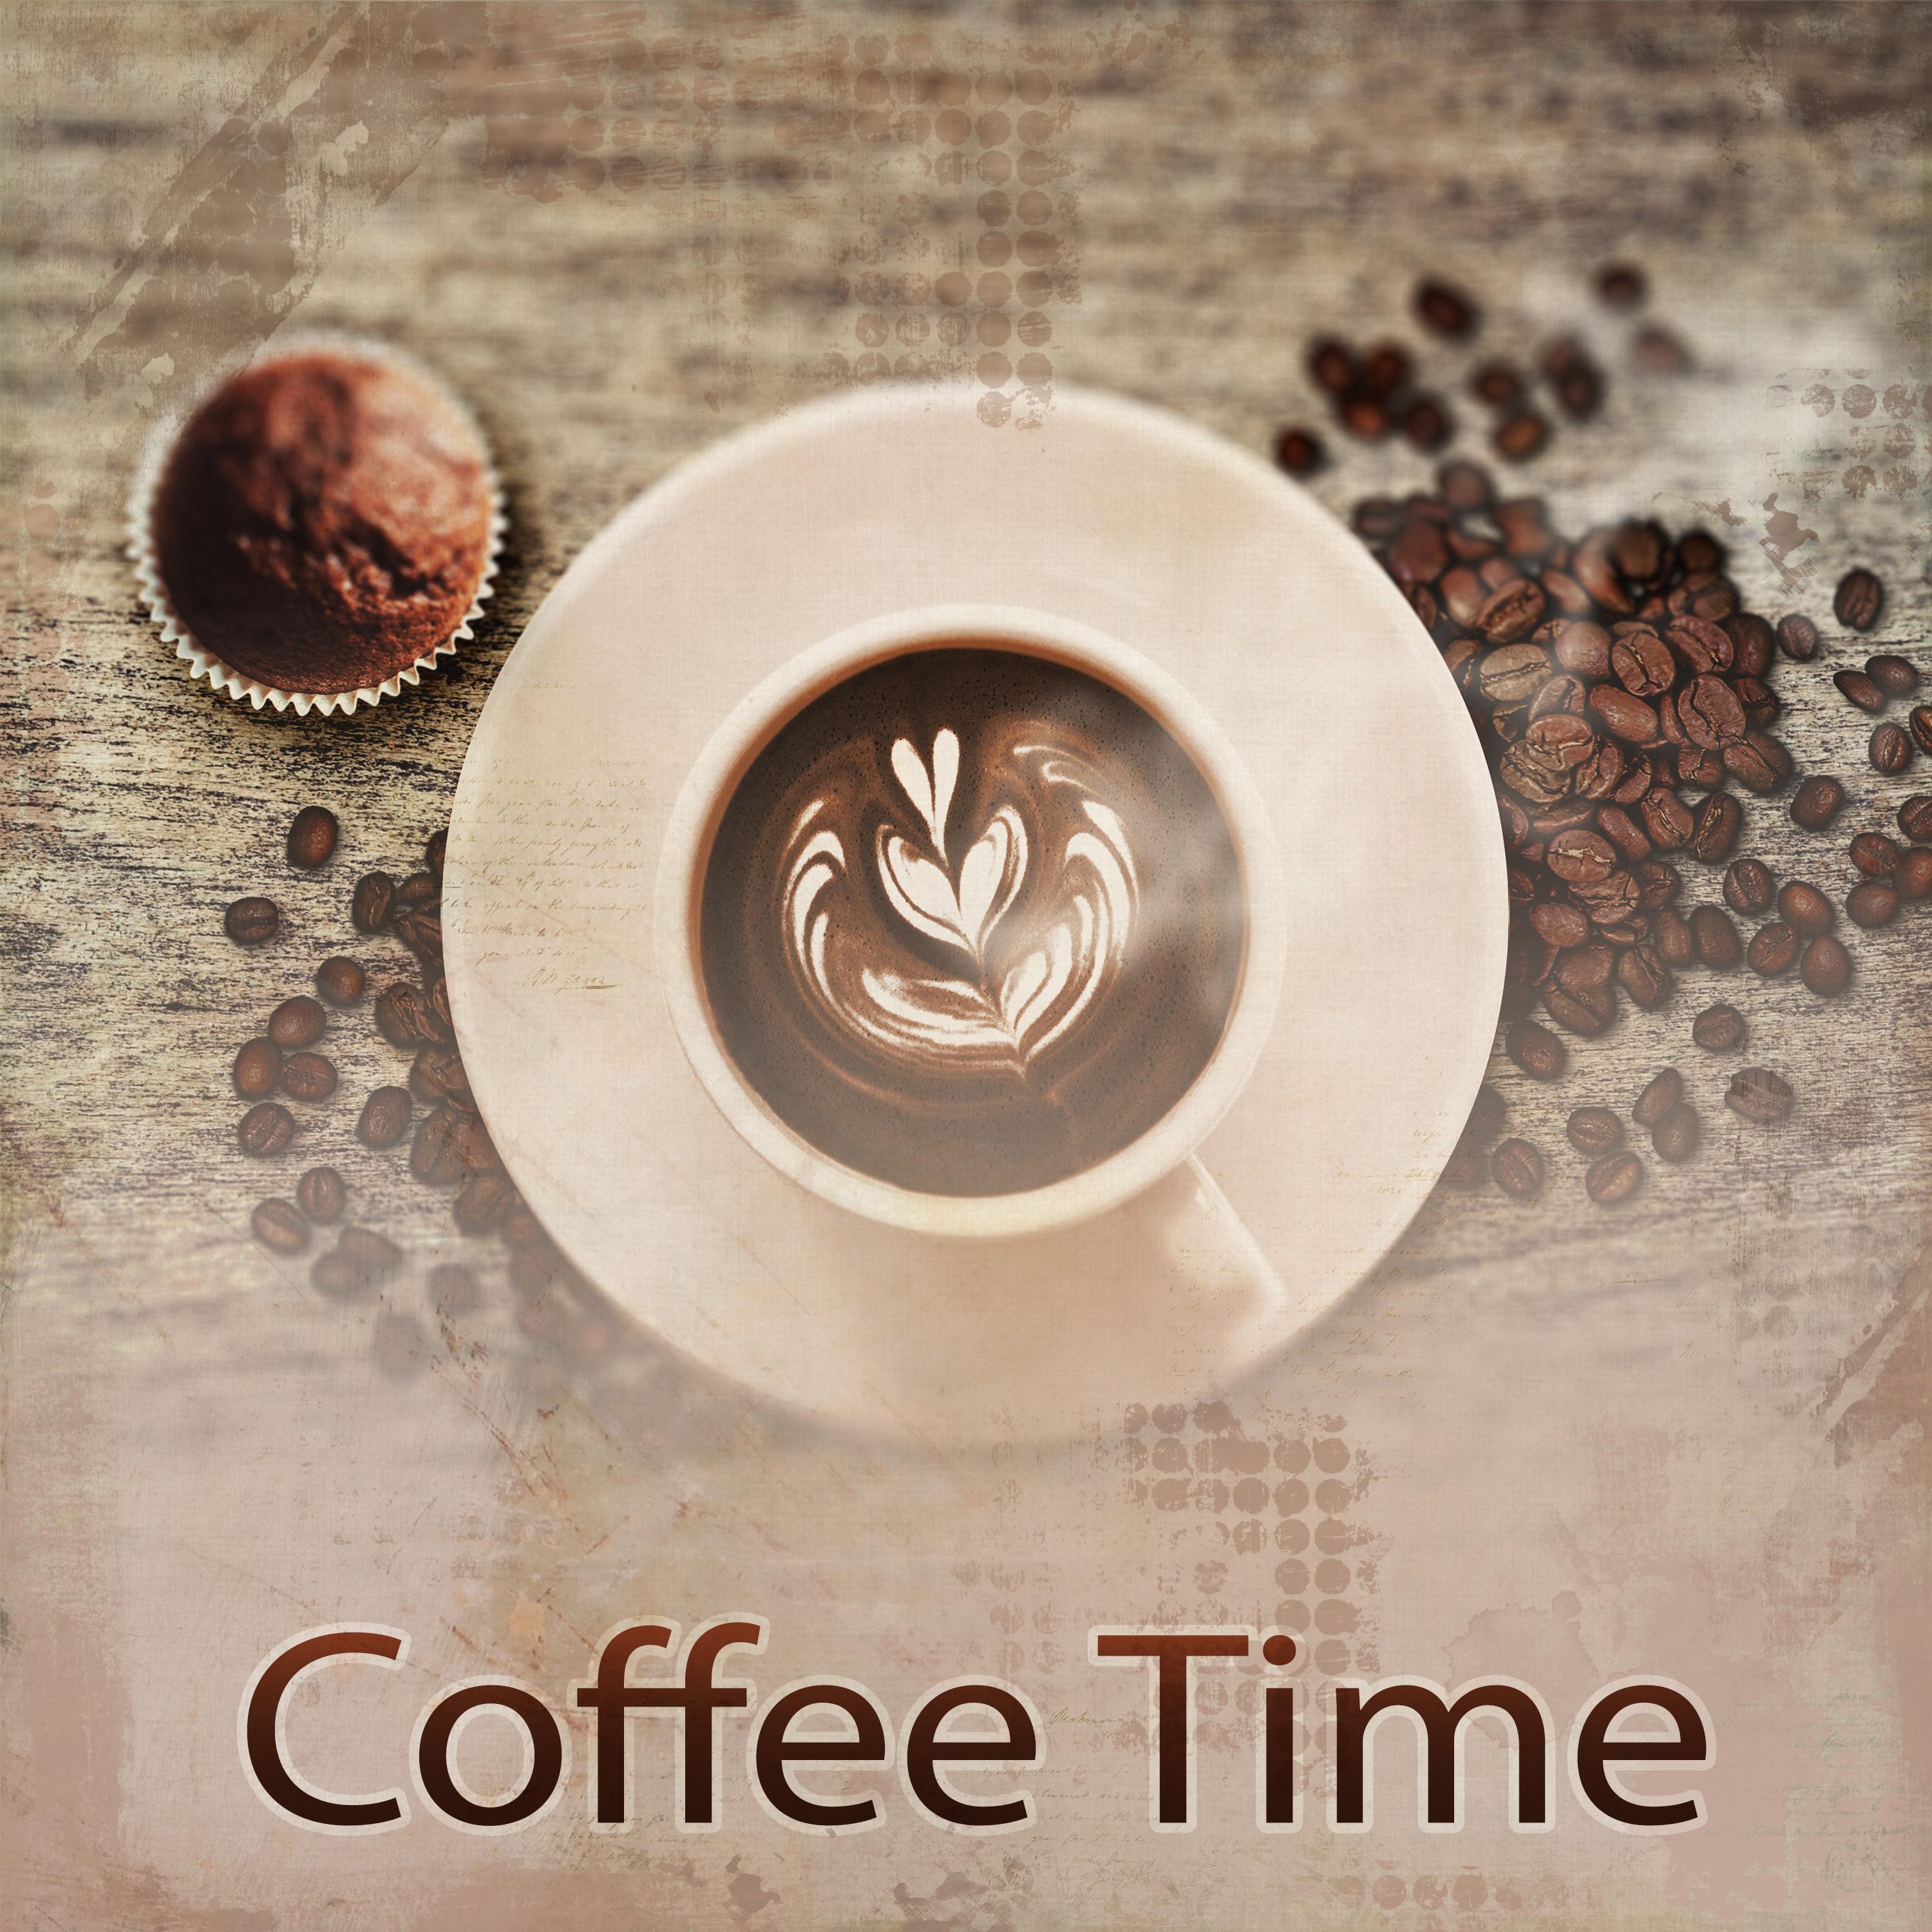 Coffee Time  Best Restaurant Music, Drink Coffee, Peaceful Music, Chilled Waves